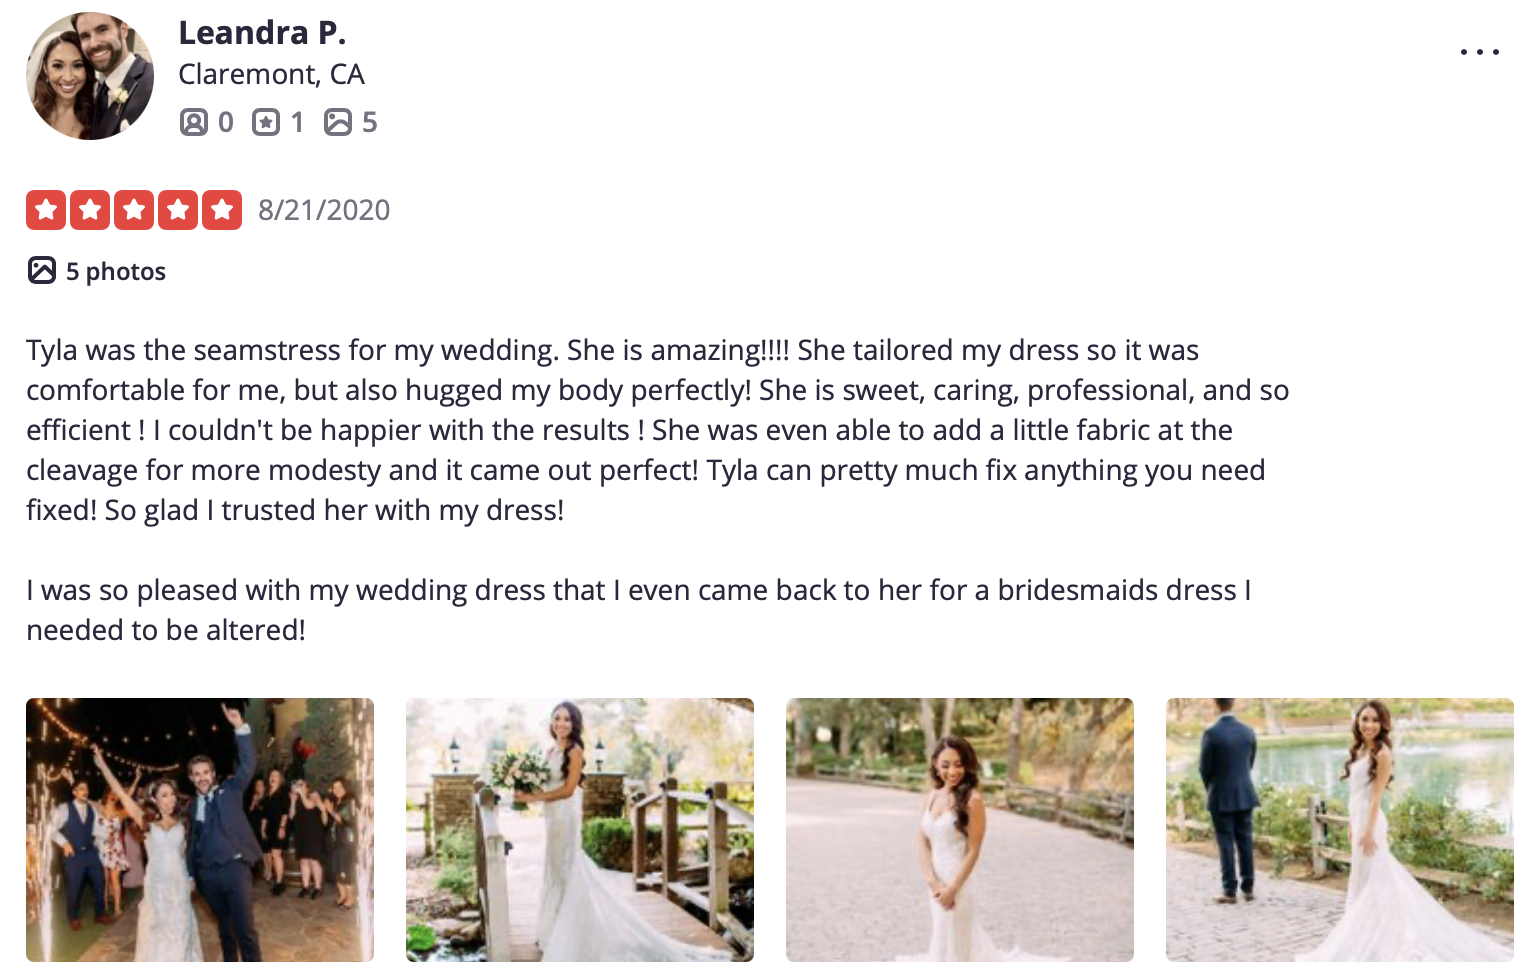 Leandra left a review for tyla's bride, and how tyla is an amazing seamstress, and how her wedding dress alterations turned out perfect and dress hugged her body just right.